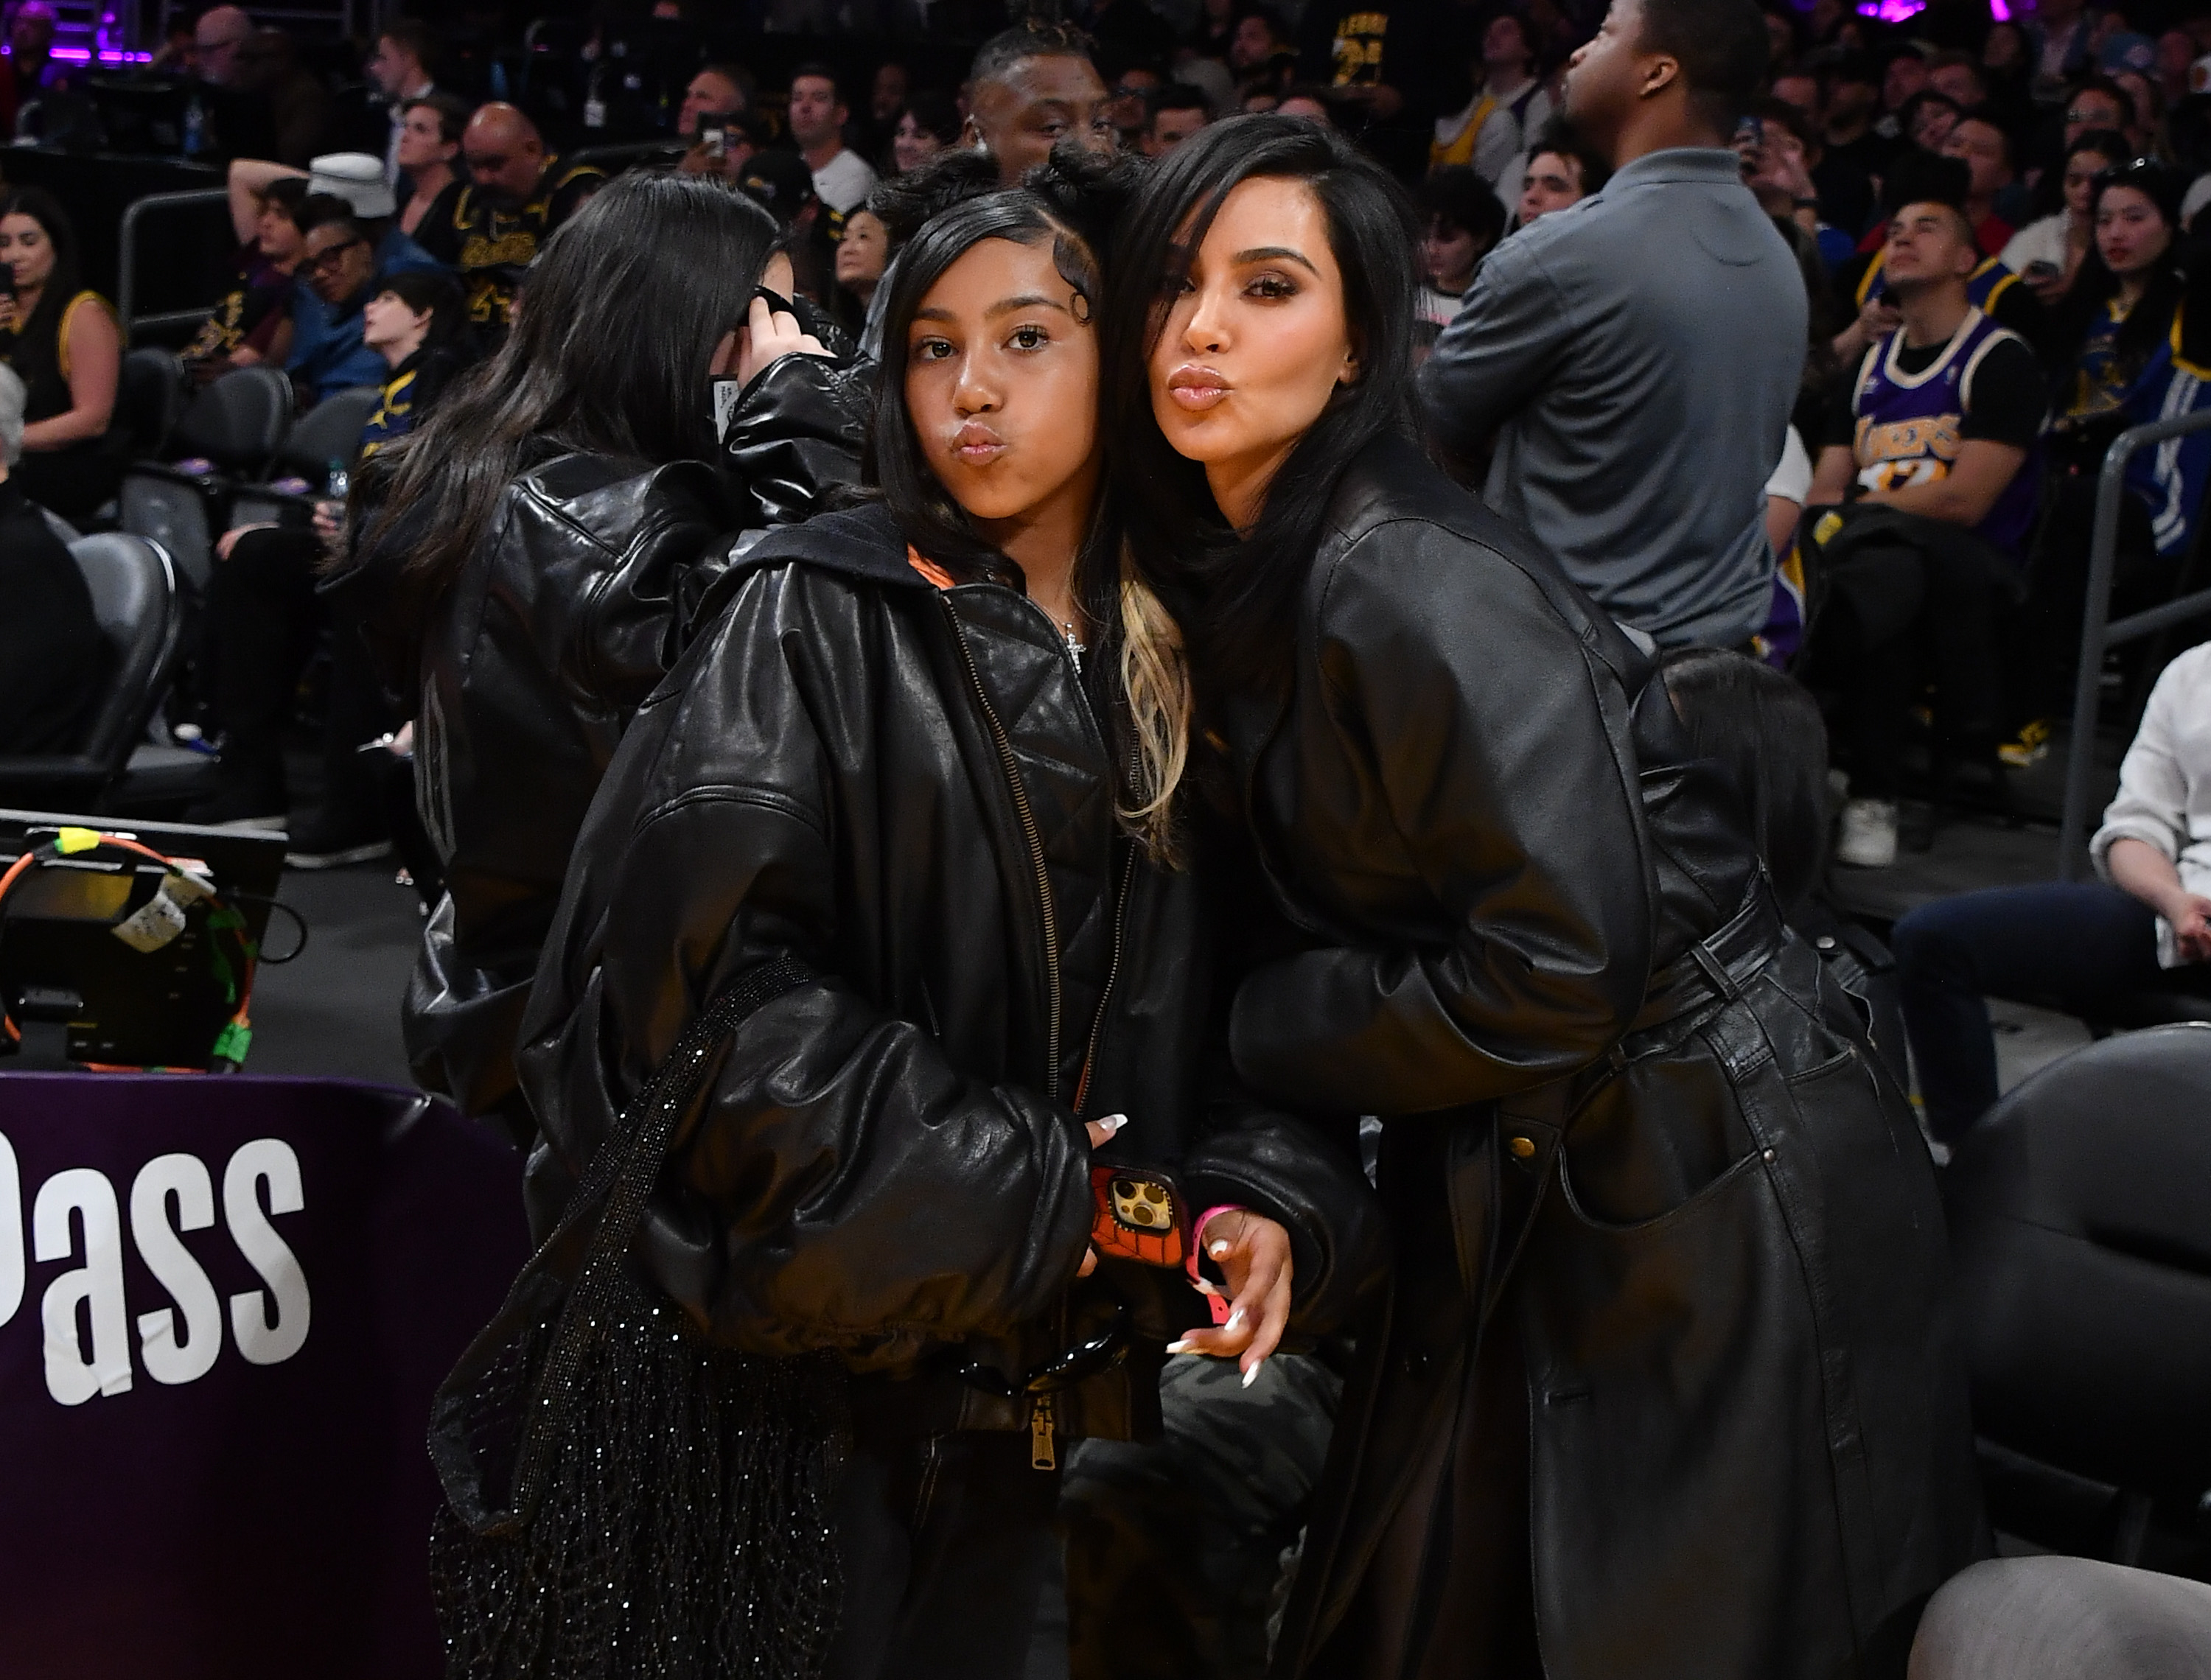 Kim Kardashian and her daughter, North West, both dressed in matching dark oversized leather jackets, posing at a basketball game with audience members in the background